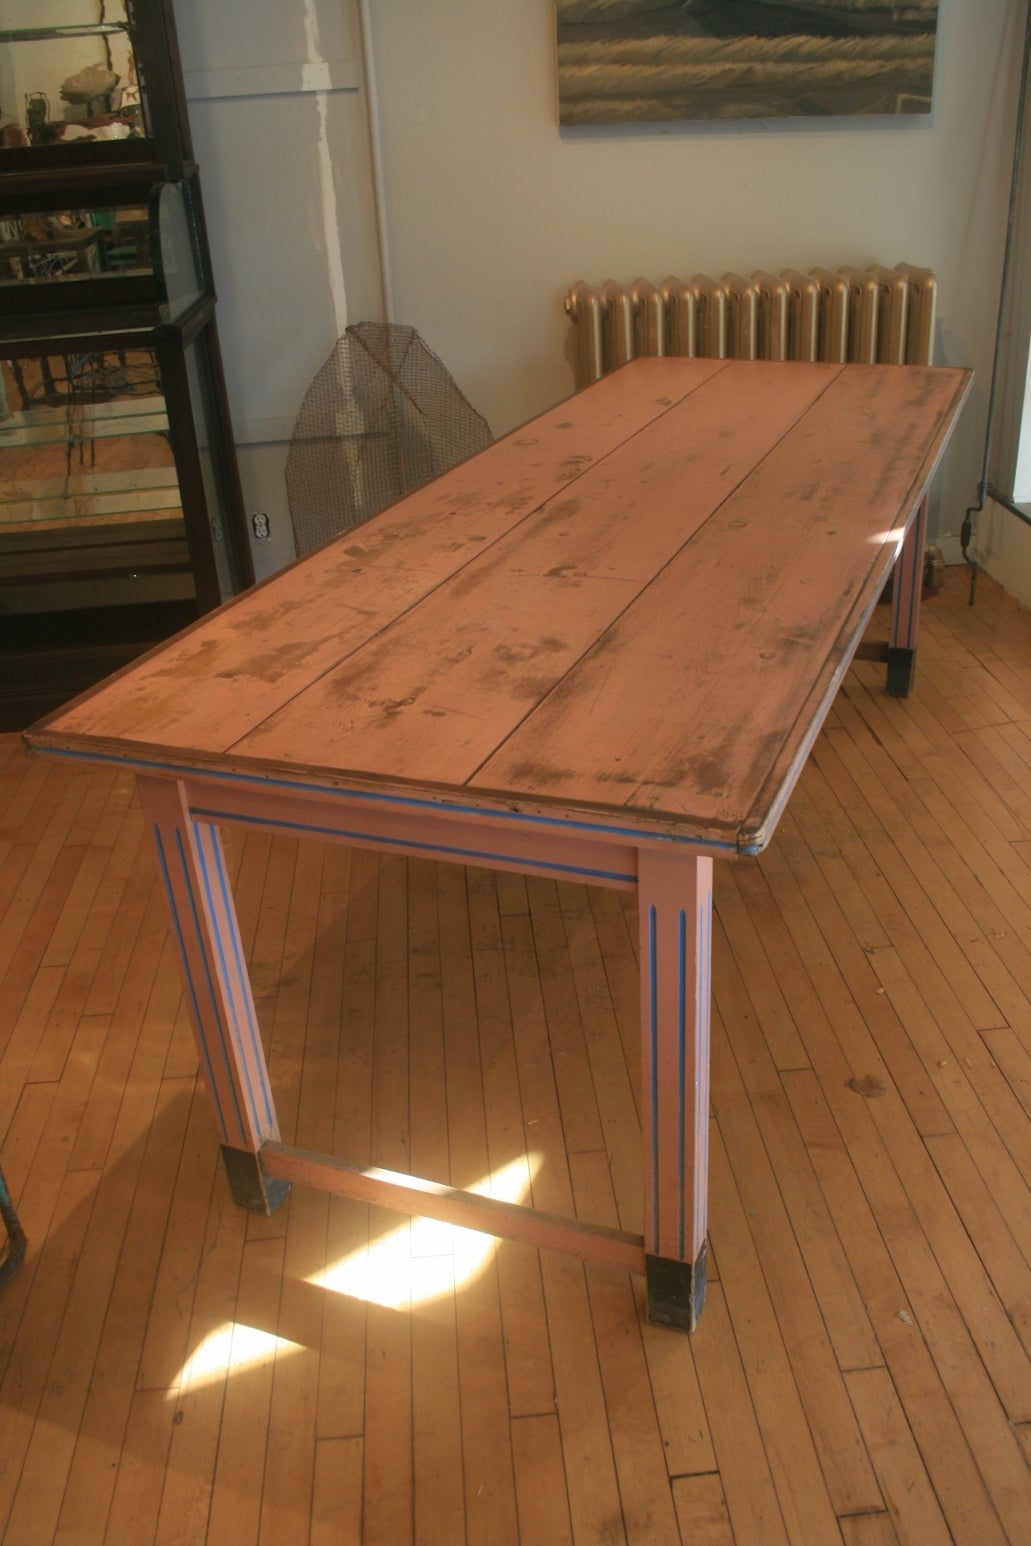 Beautiful salmon pink European farm table. The legs, apron and edge all have fluting painted blue for a nice accent. The paint is all original. The table has very nice proportions and great color.